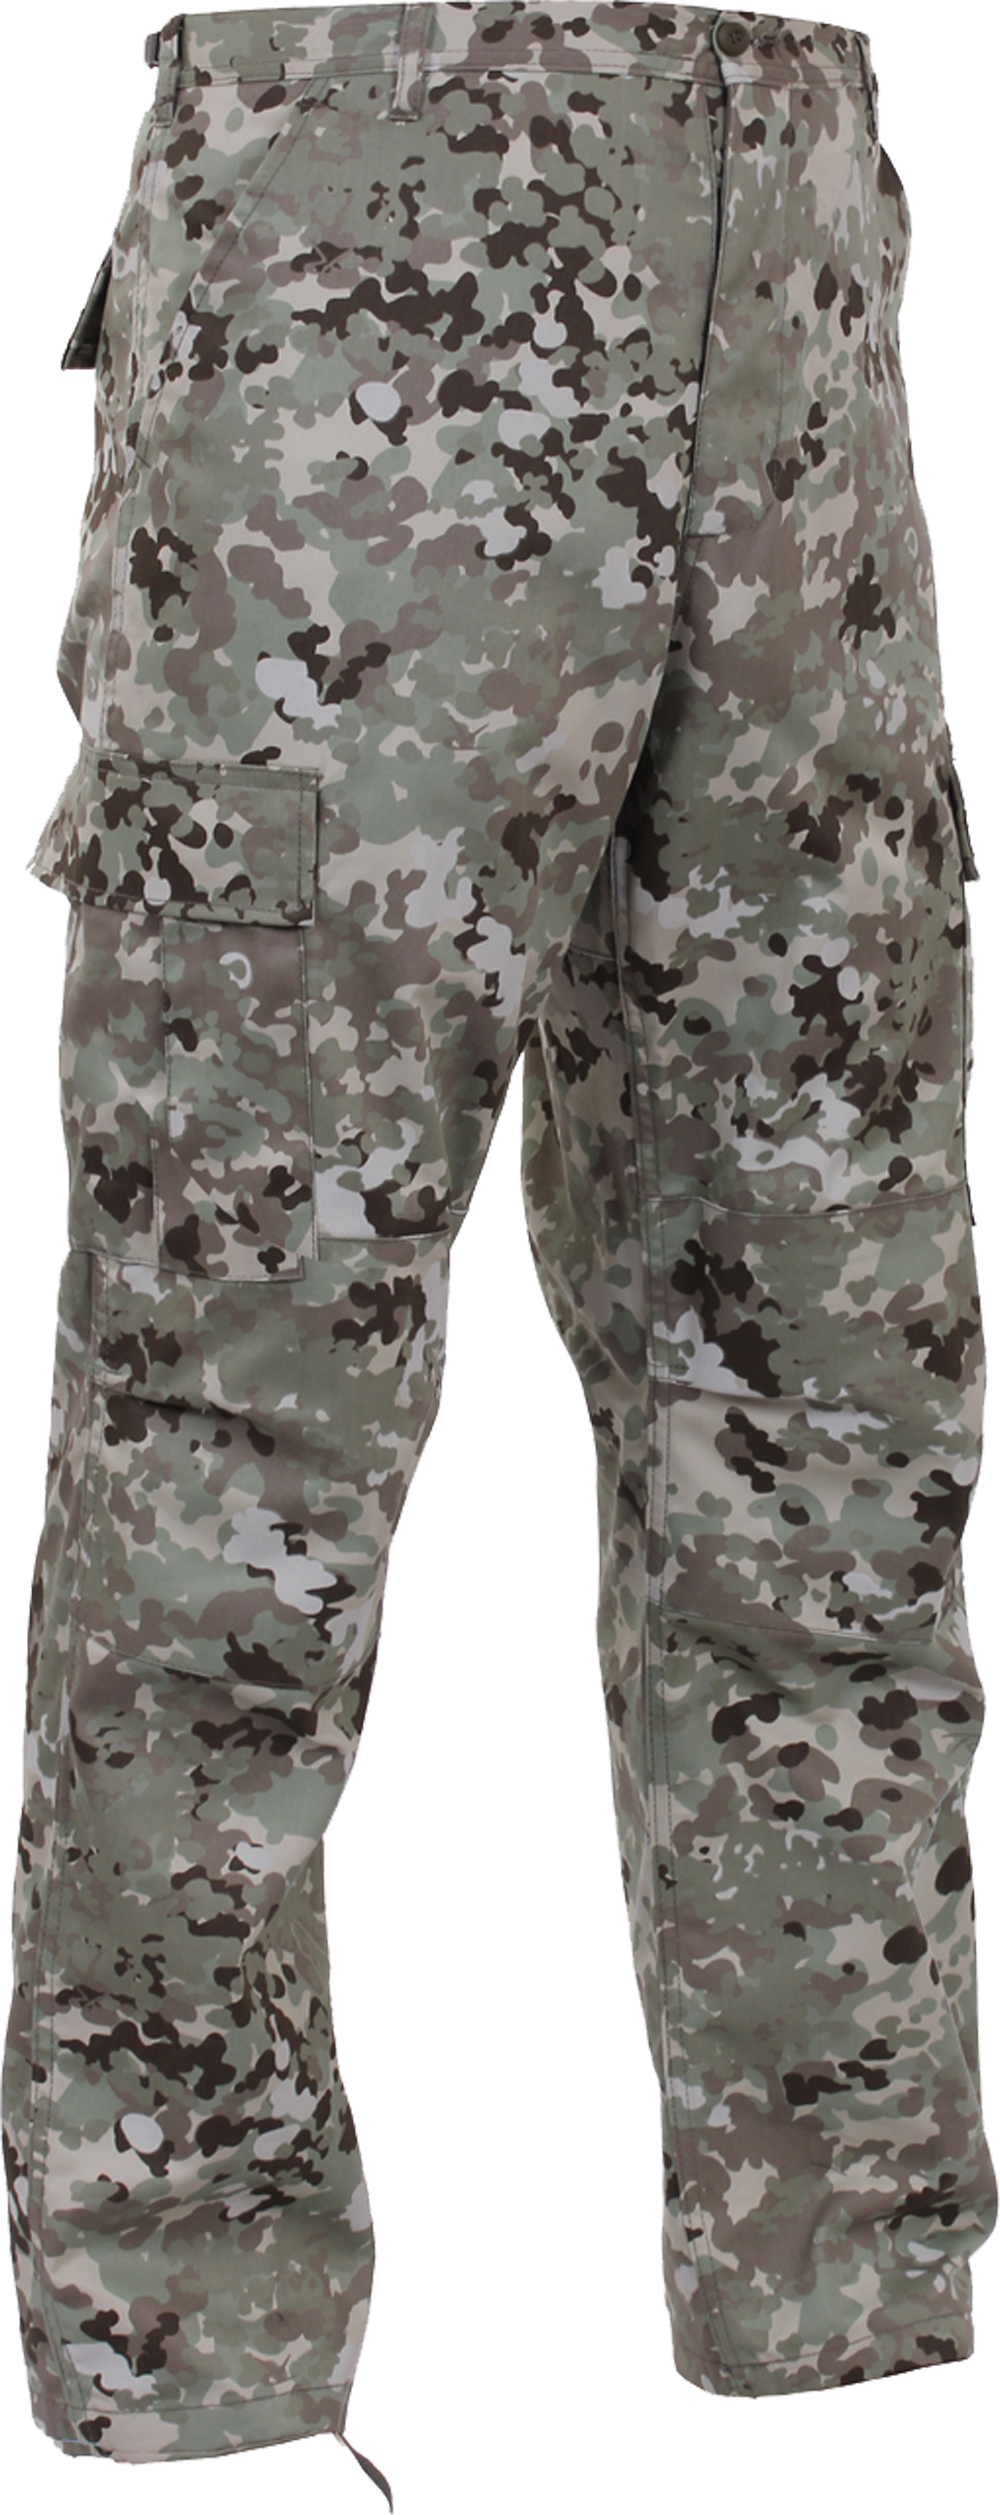 Rothco Total Terrain Camouflage Military Cargo BDU Fatigue Pants